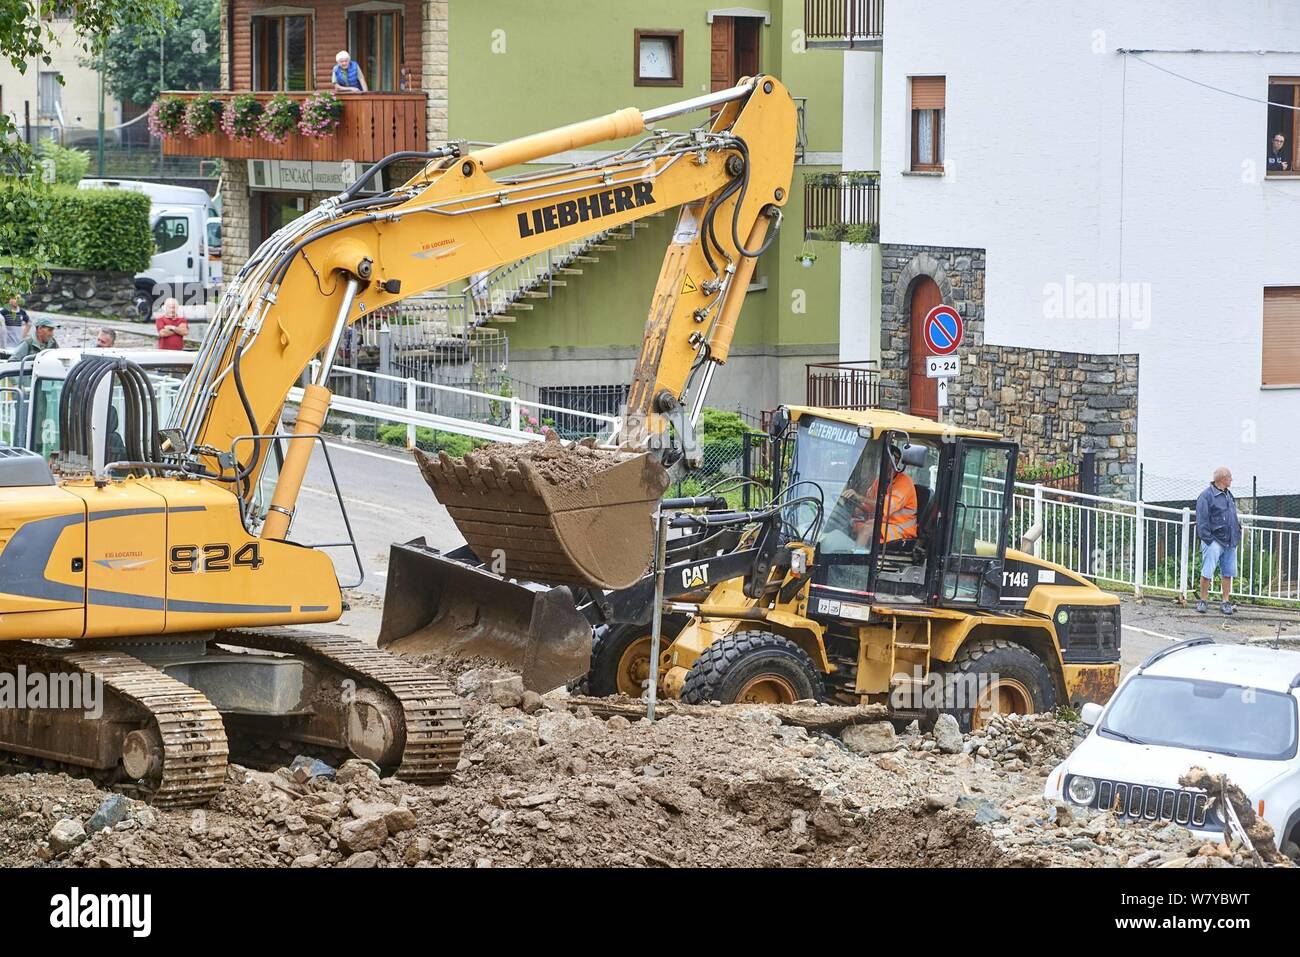 Casargo, Italy. 7th Aug 2019. Bad weather - Invasion of mud and debris in Casargo, submerged cars, landslides and displacements. One hundred and forty people evacuated. flooding of the Verrone stream (Locatelli Alberto/Fotogramma, Casargo Lecco - 2019-08-07) Credit: Independent Photo Agency Srl/Alamy Live News Stock Photo